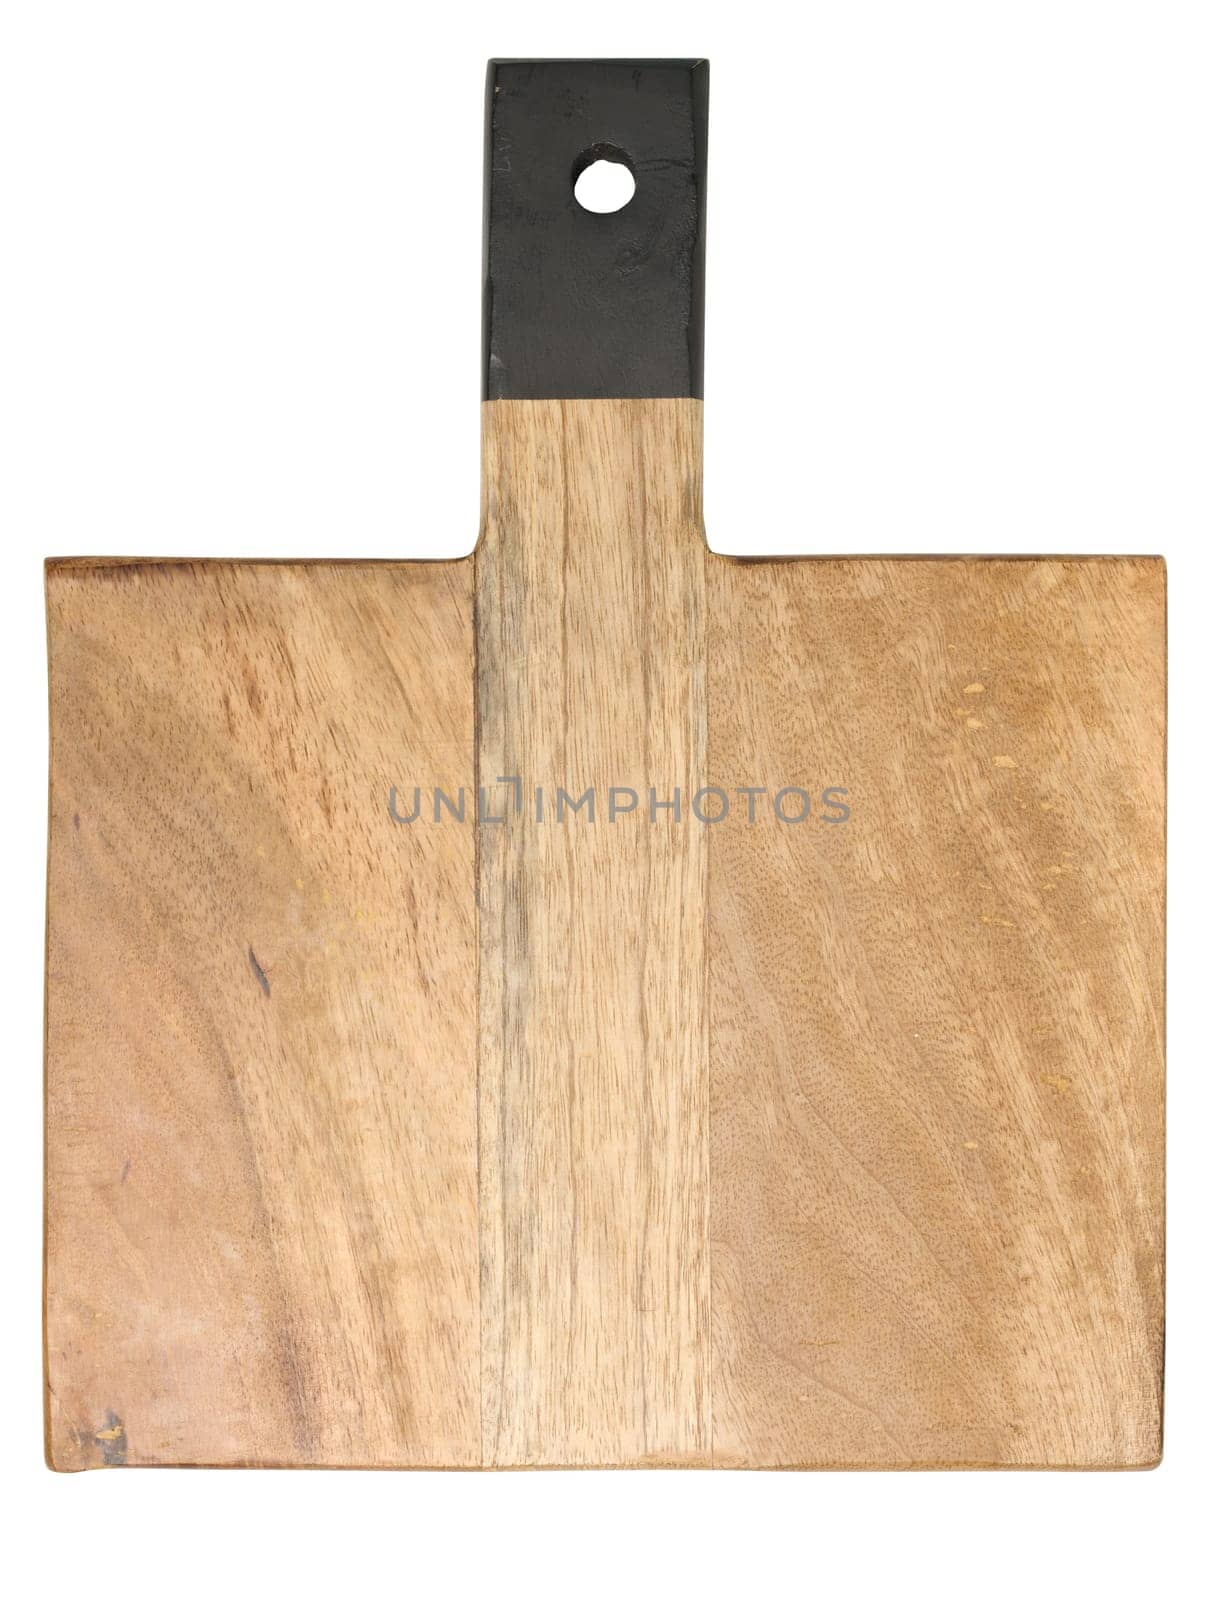 Empty wooden kitchen cutting board with handle on white isolated background, top view